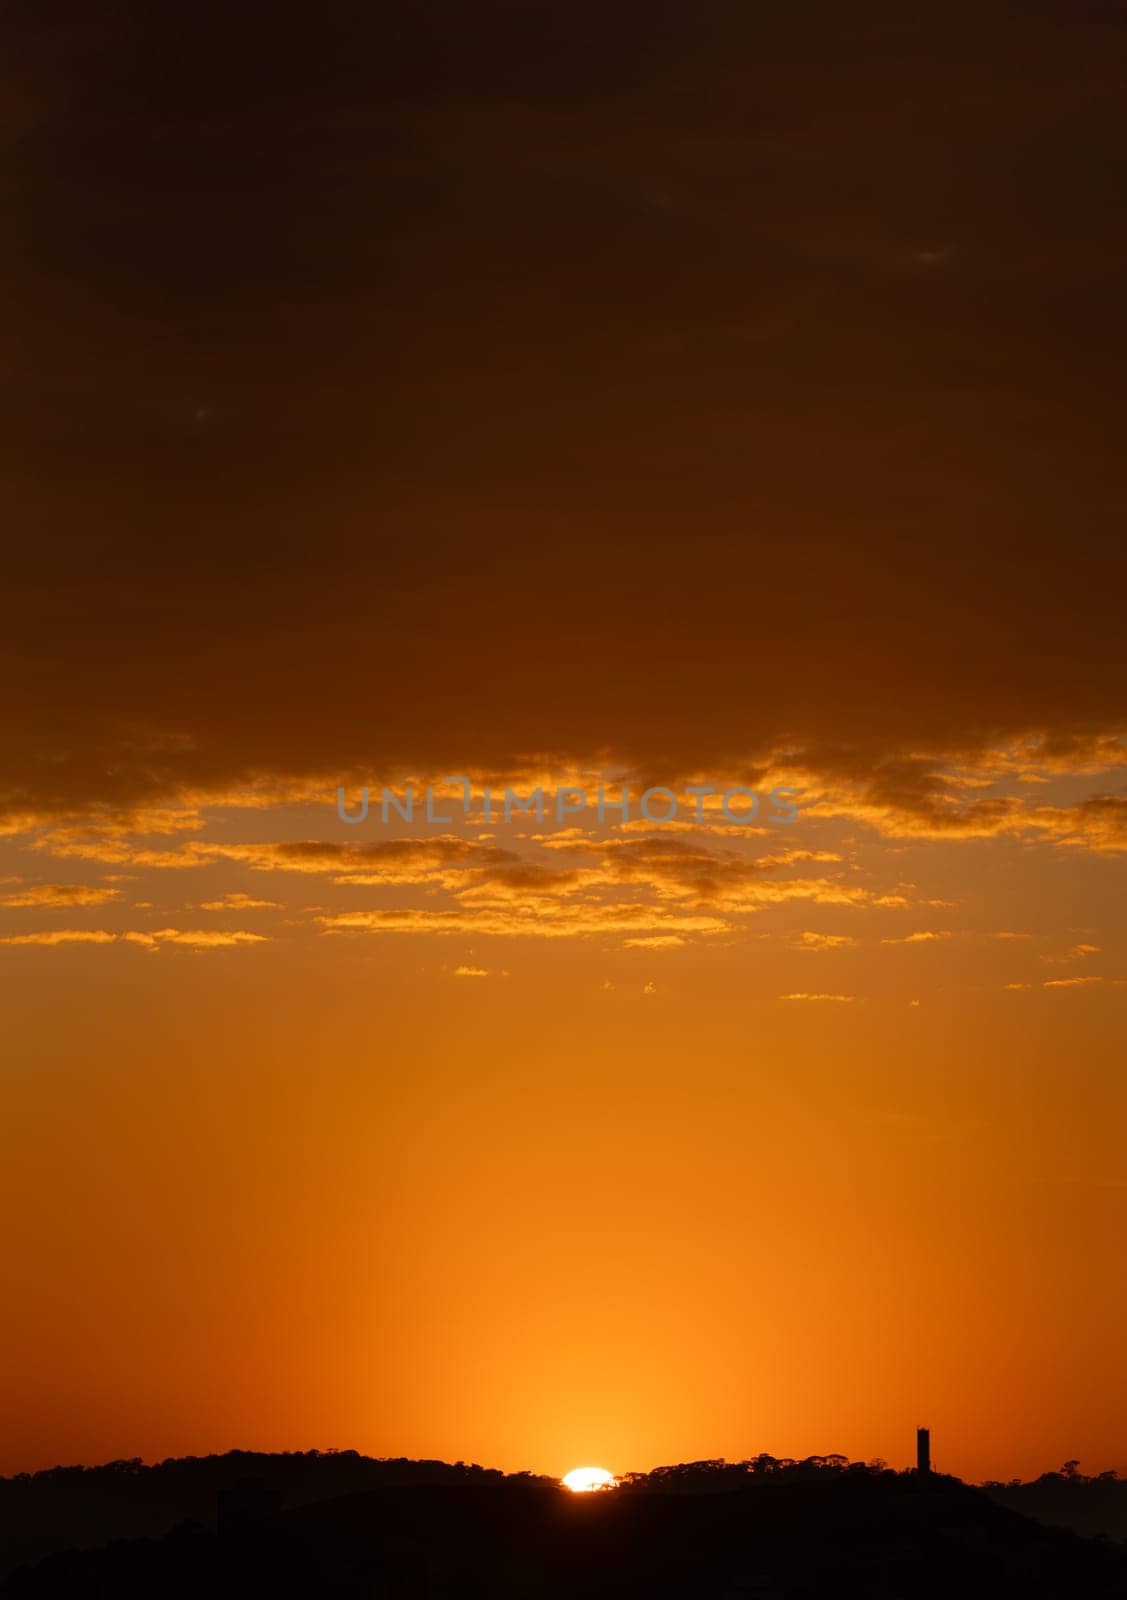 Stunning sunrise behind mountains with a tower silhouette under a cloudy orange sky, providing an ideal background with text space.